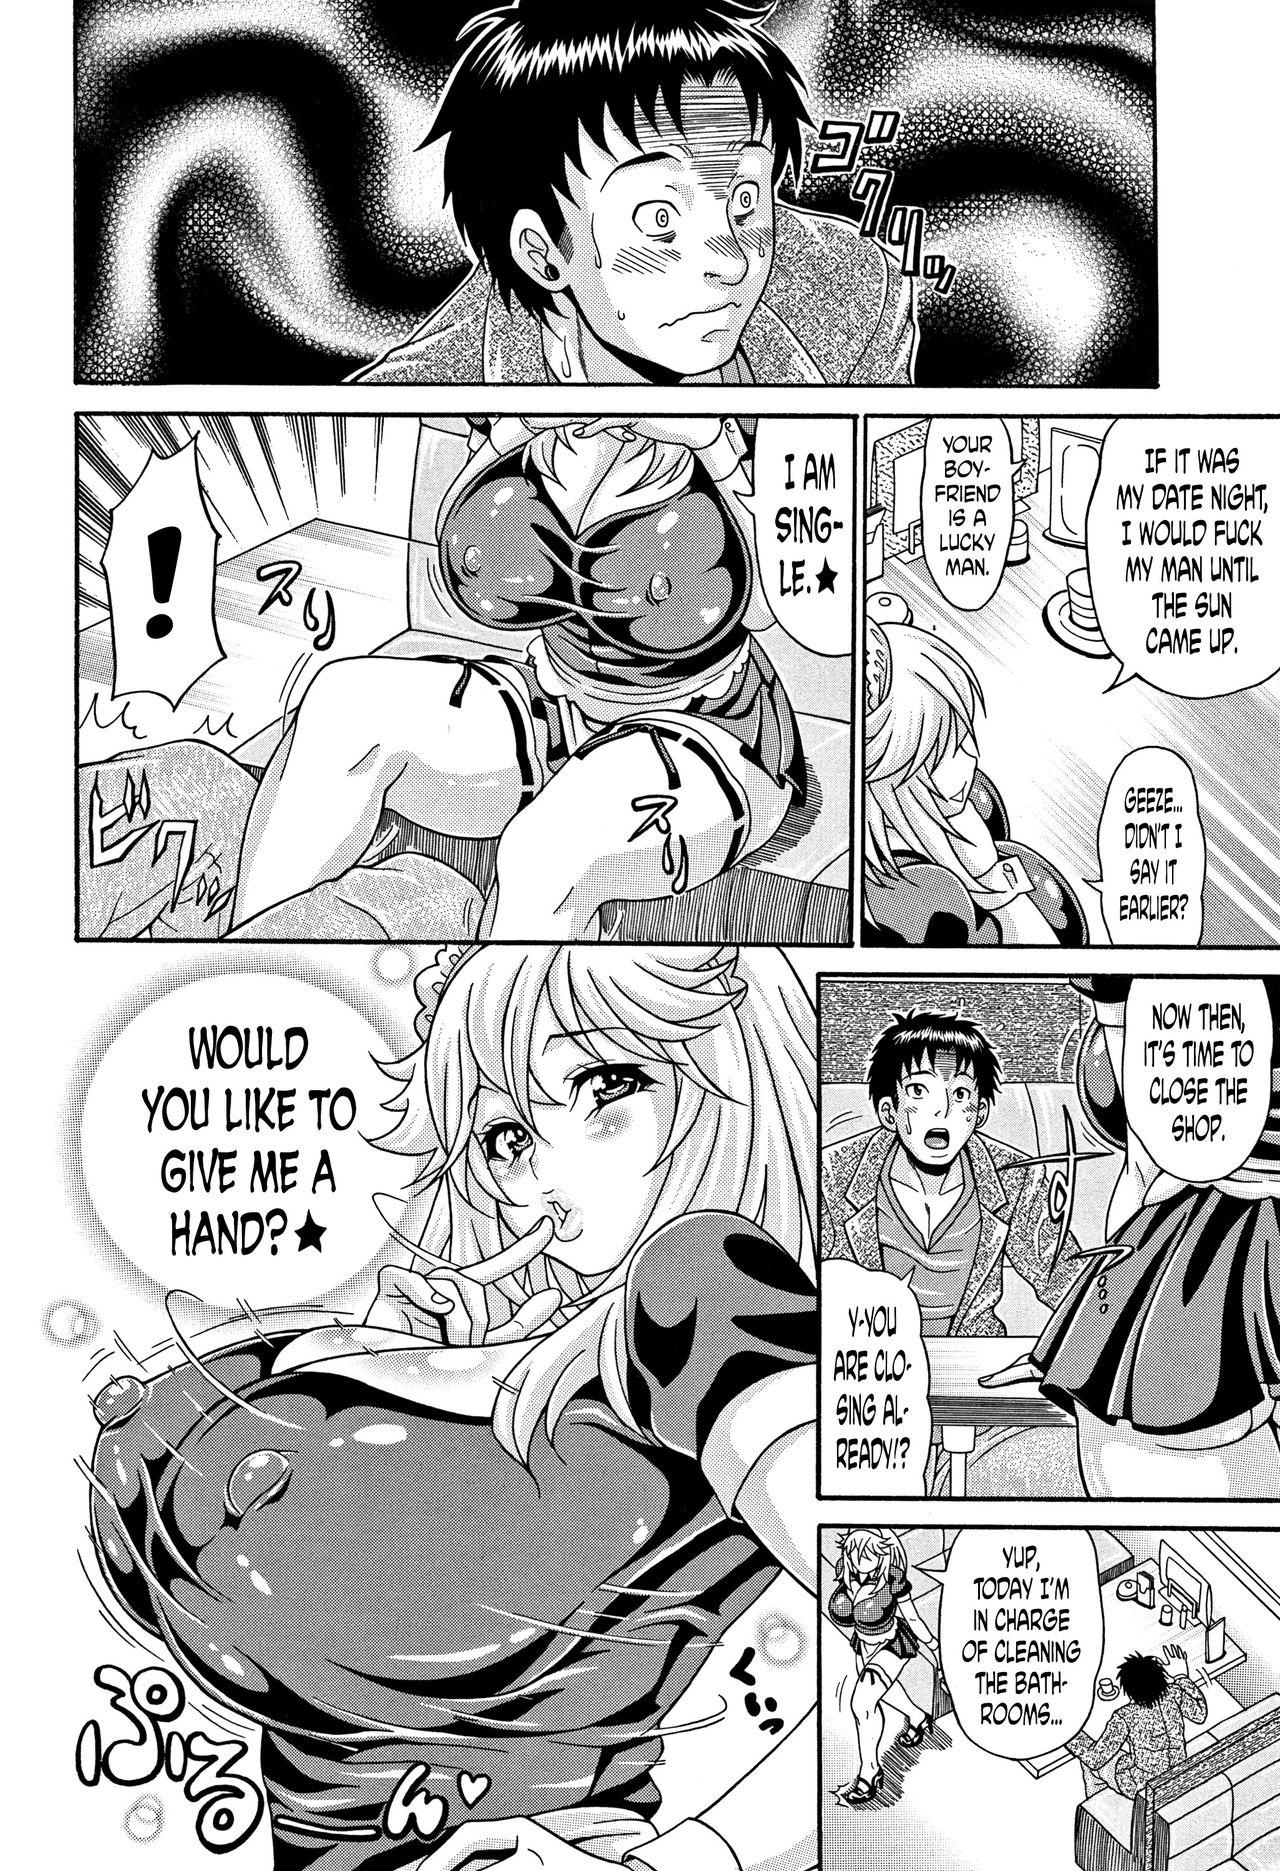 [Andou Hiroyuki] Mamire Chichi - Sticky Tits Feel Hot All Over. Ch.1-9 [English] [doujin-moe.us] 76